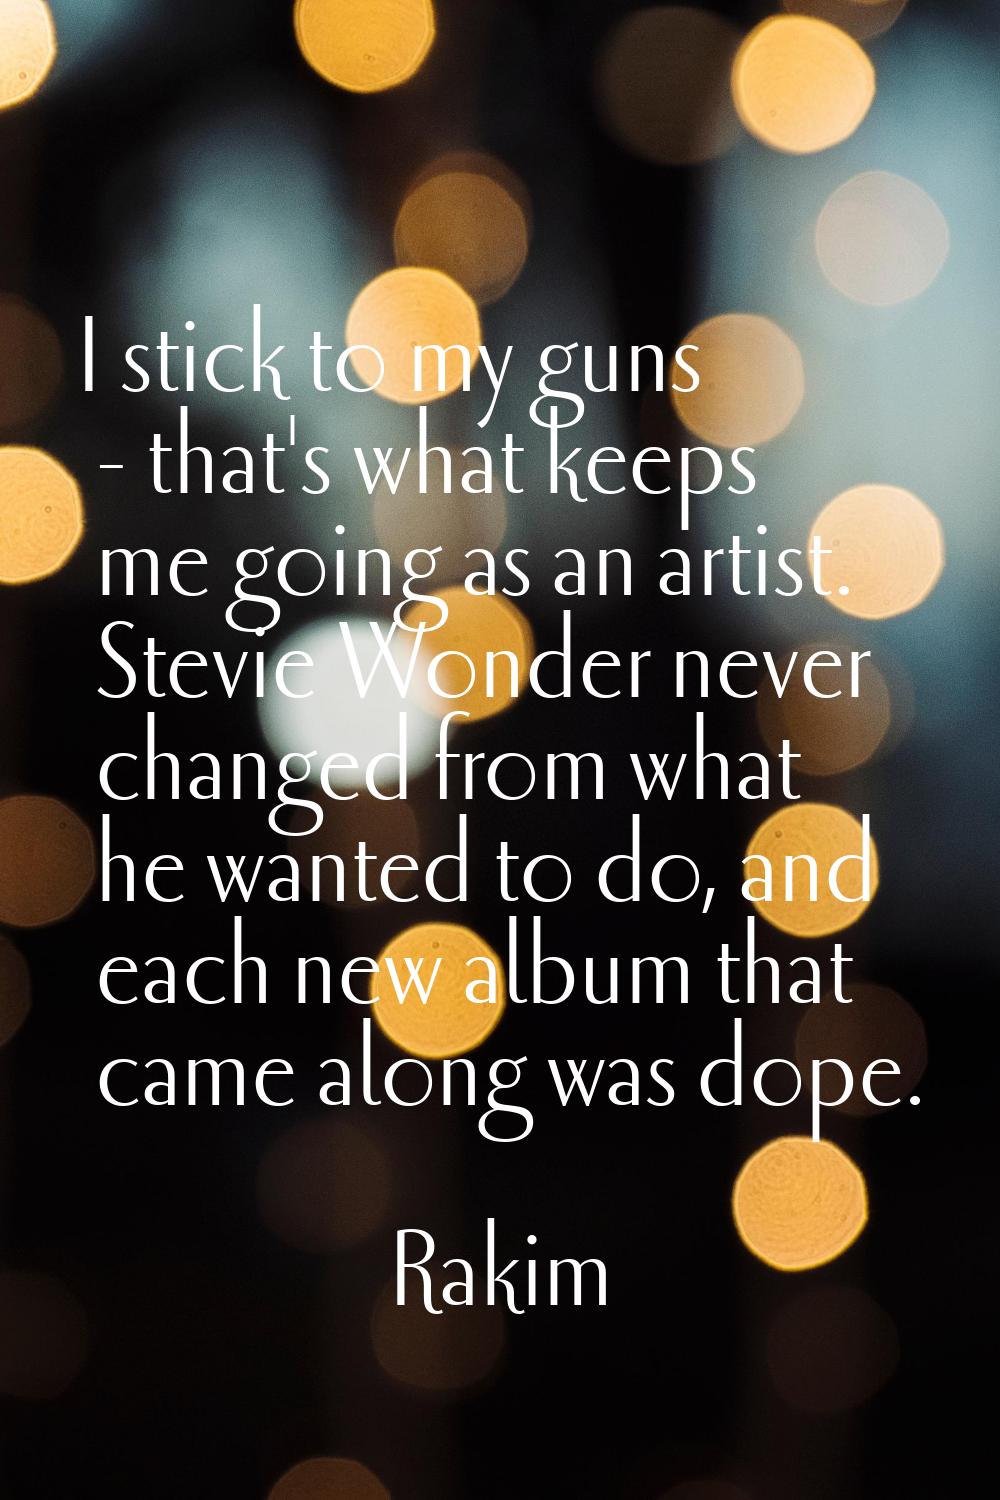 I stick to my guns - that's what keeps me going as an artist. Stevie Wonder never changed from what